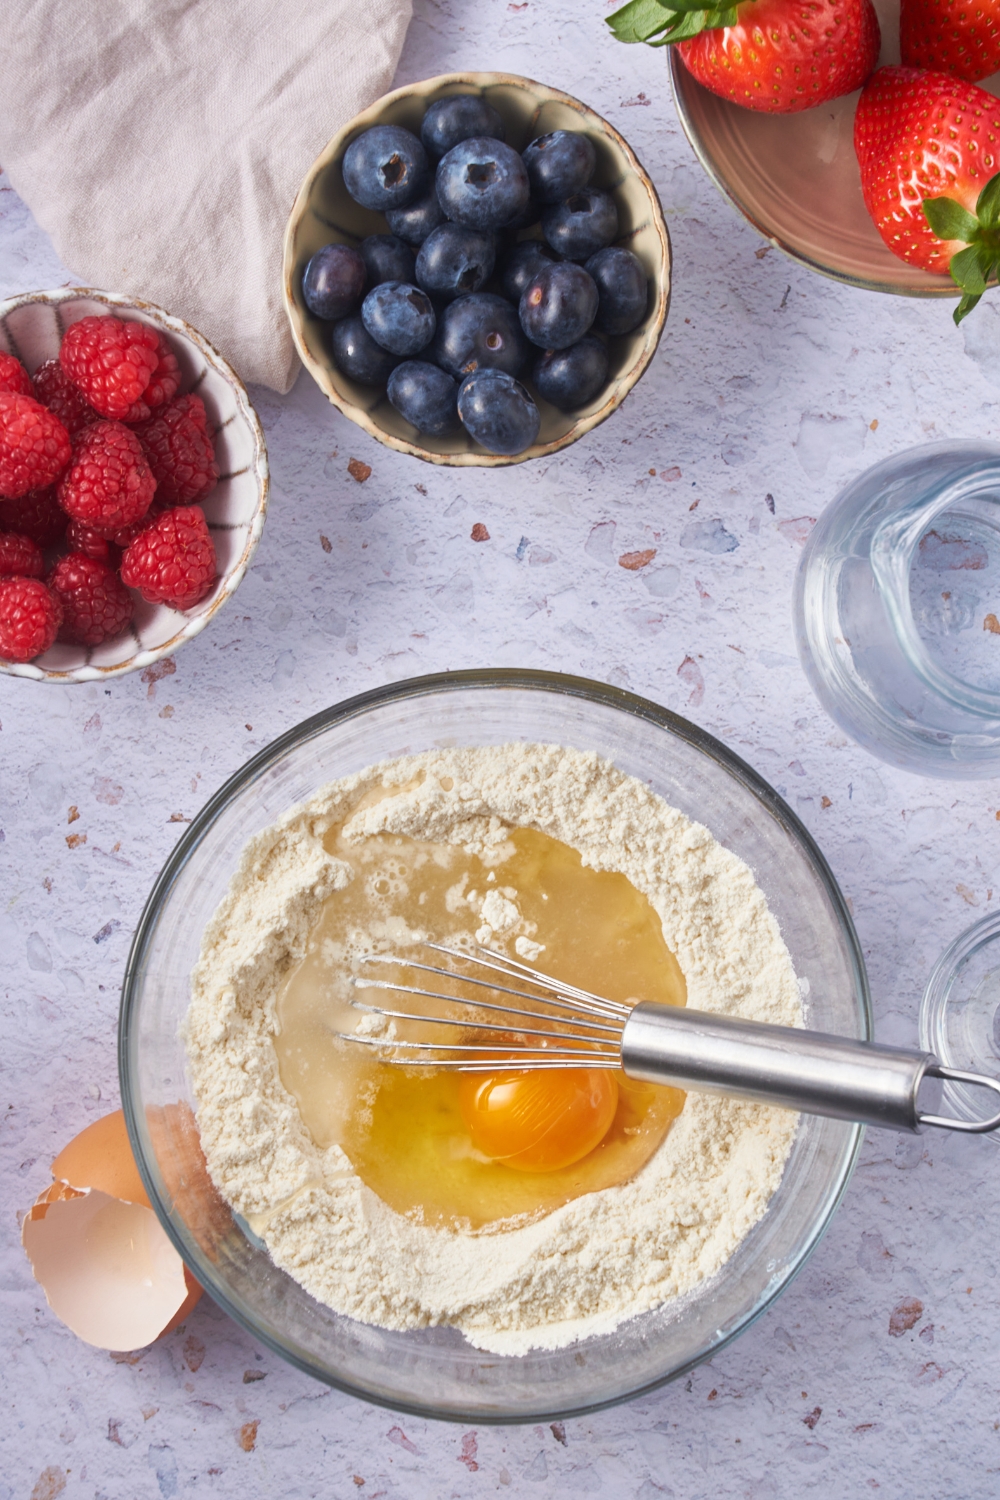 A clear bowl with waffle mix, an egg, and a whisk in it. The bowl is next to small bowls of berries.